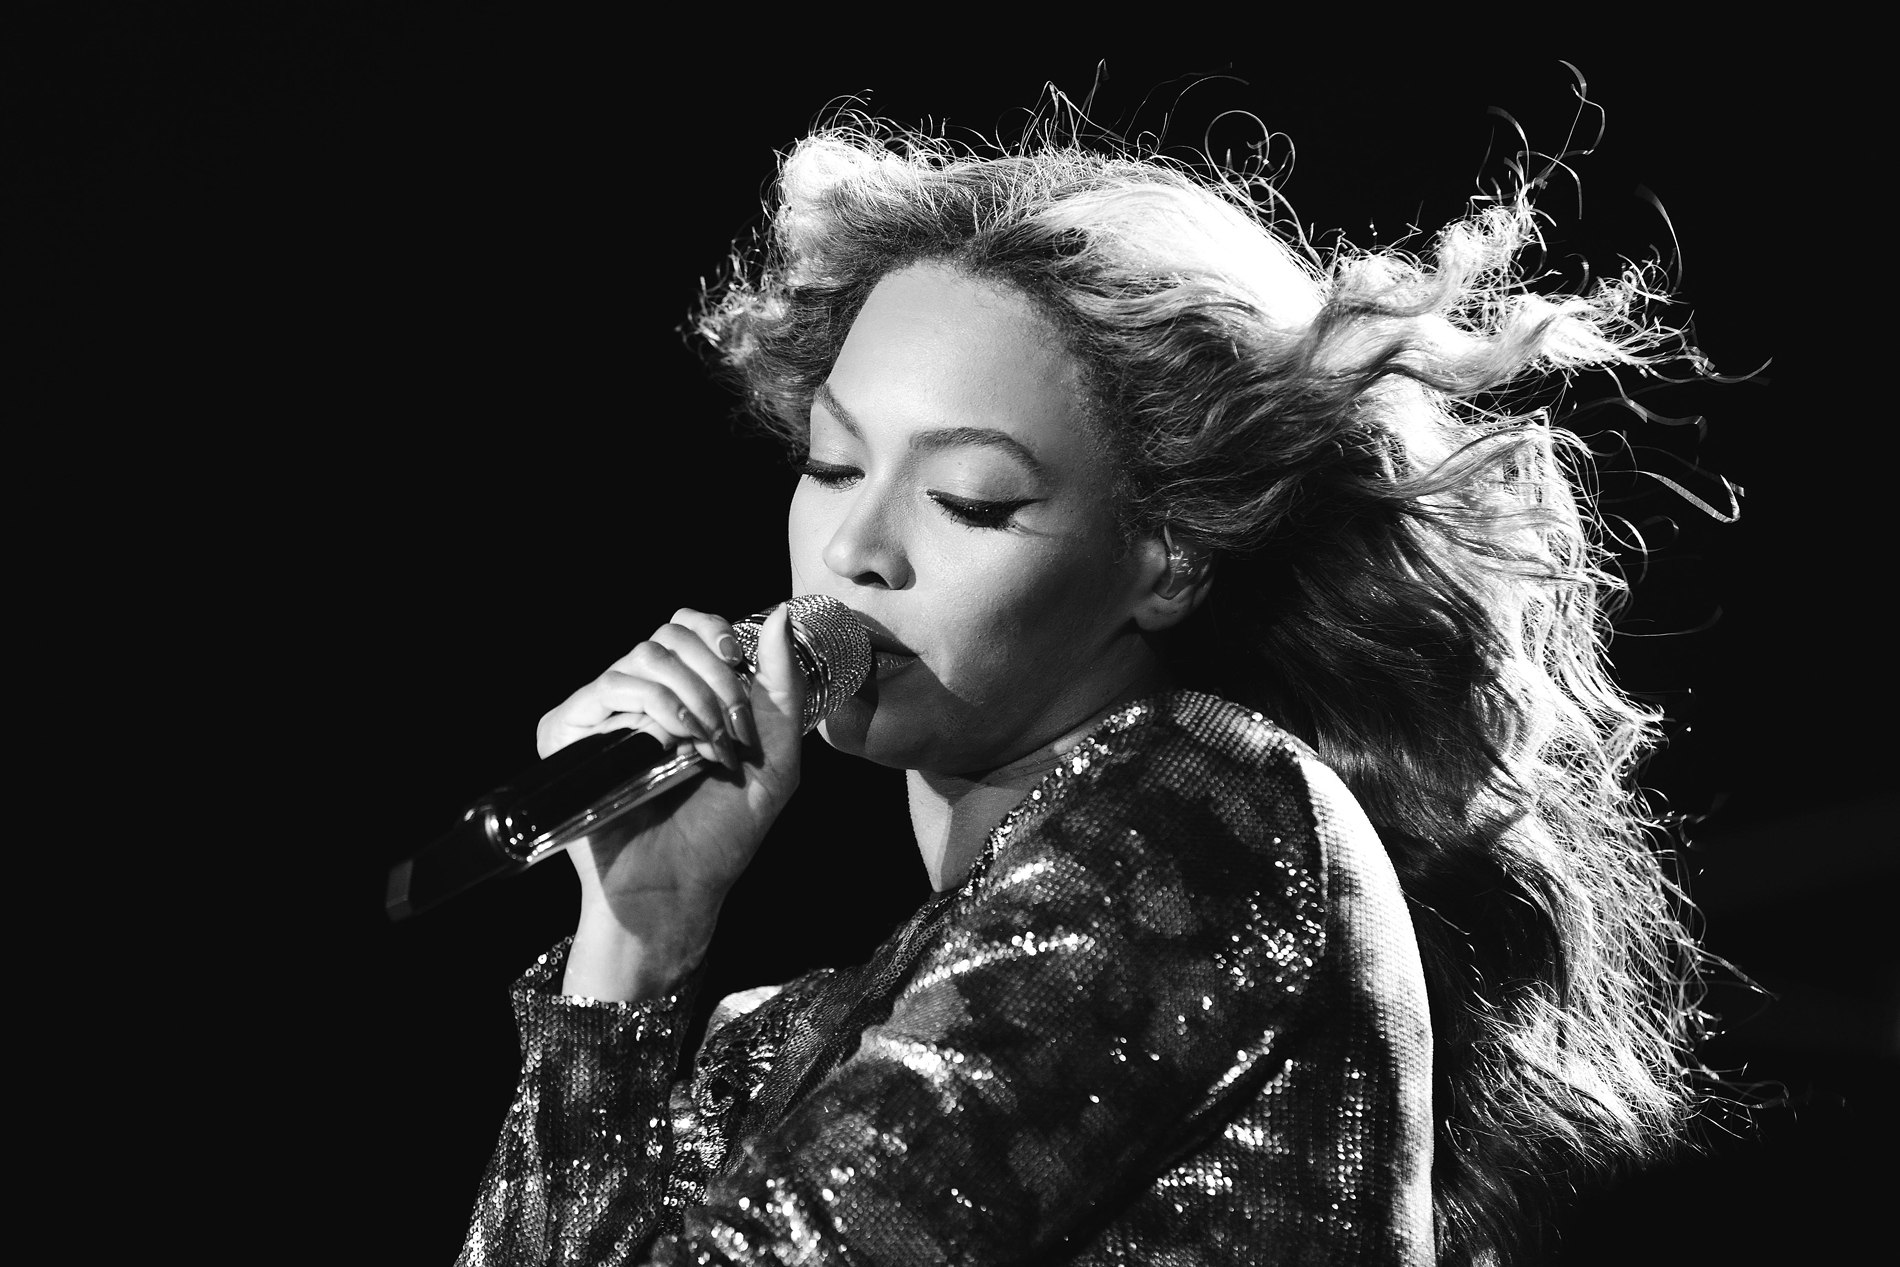 Beyonce Knowles photo 4728 of 7892 pics, wallpaper - photo #719809 ...